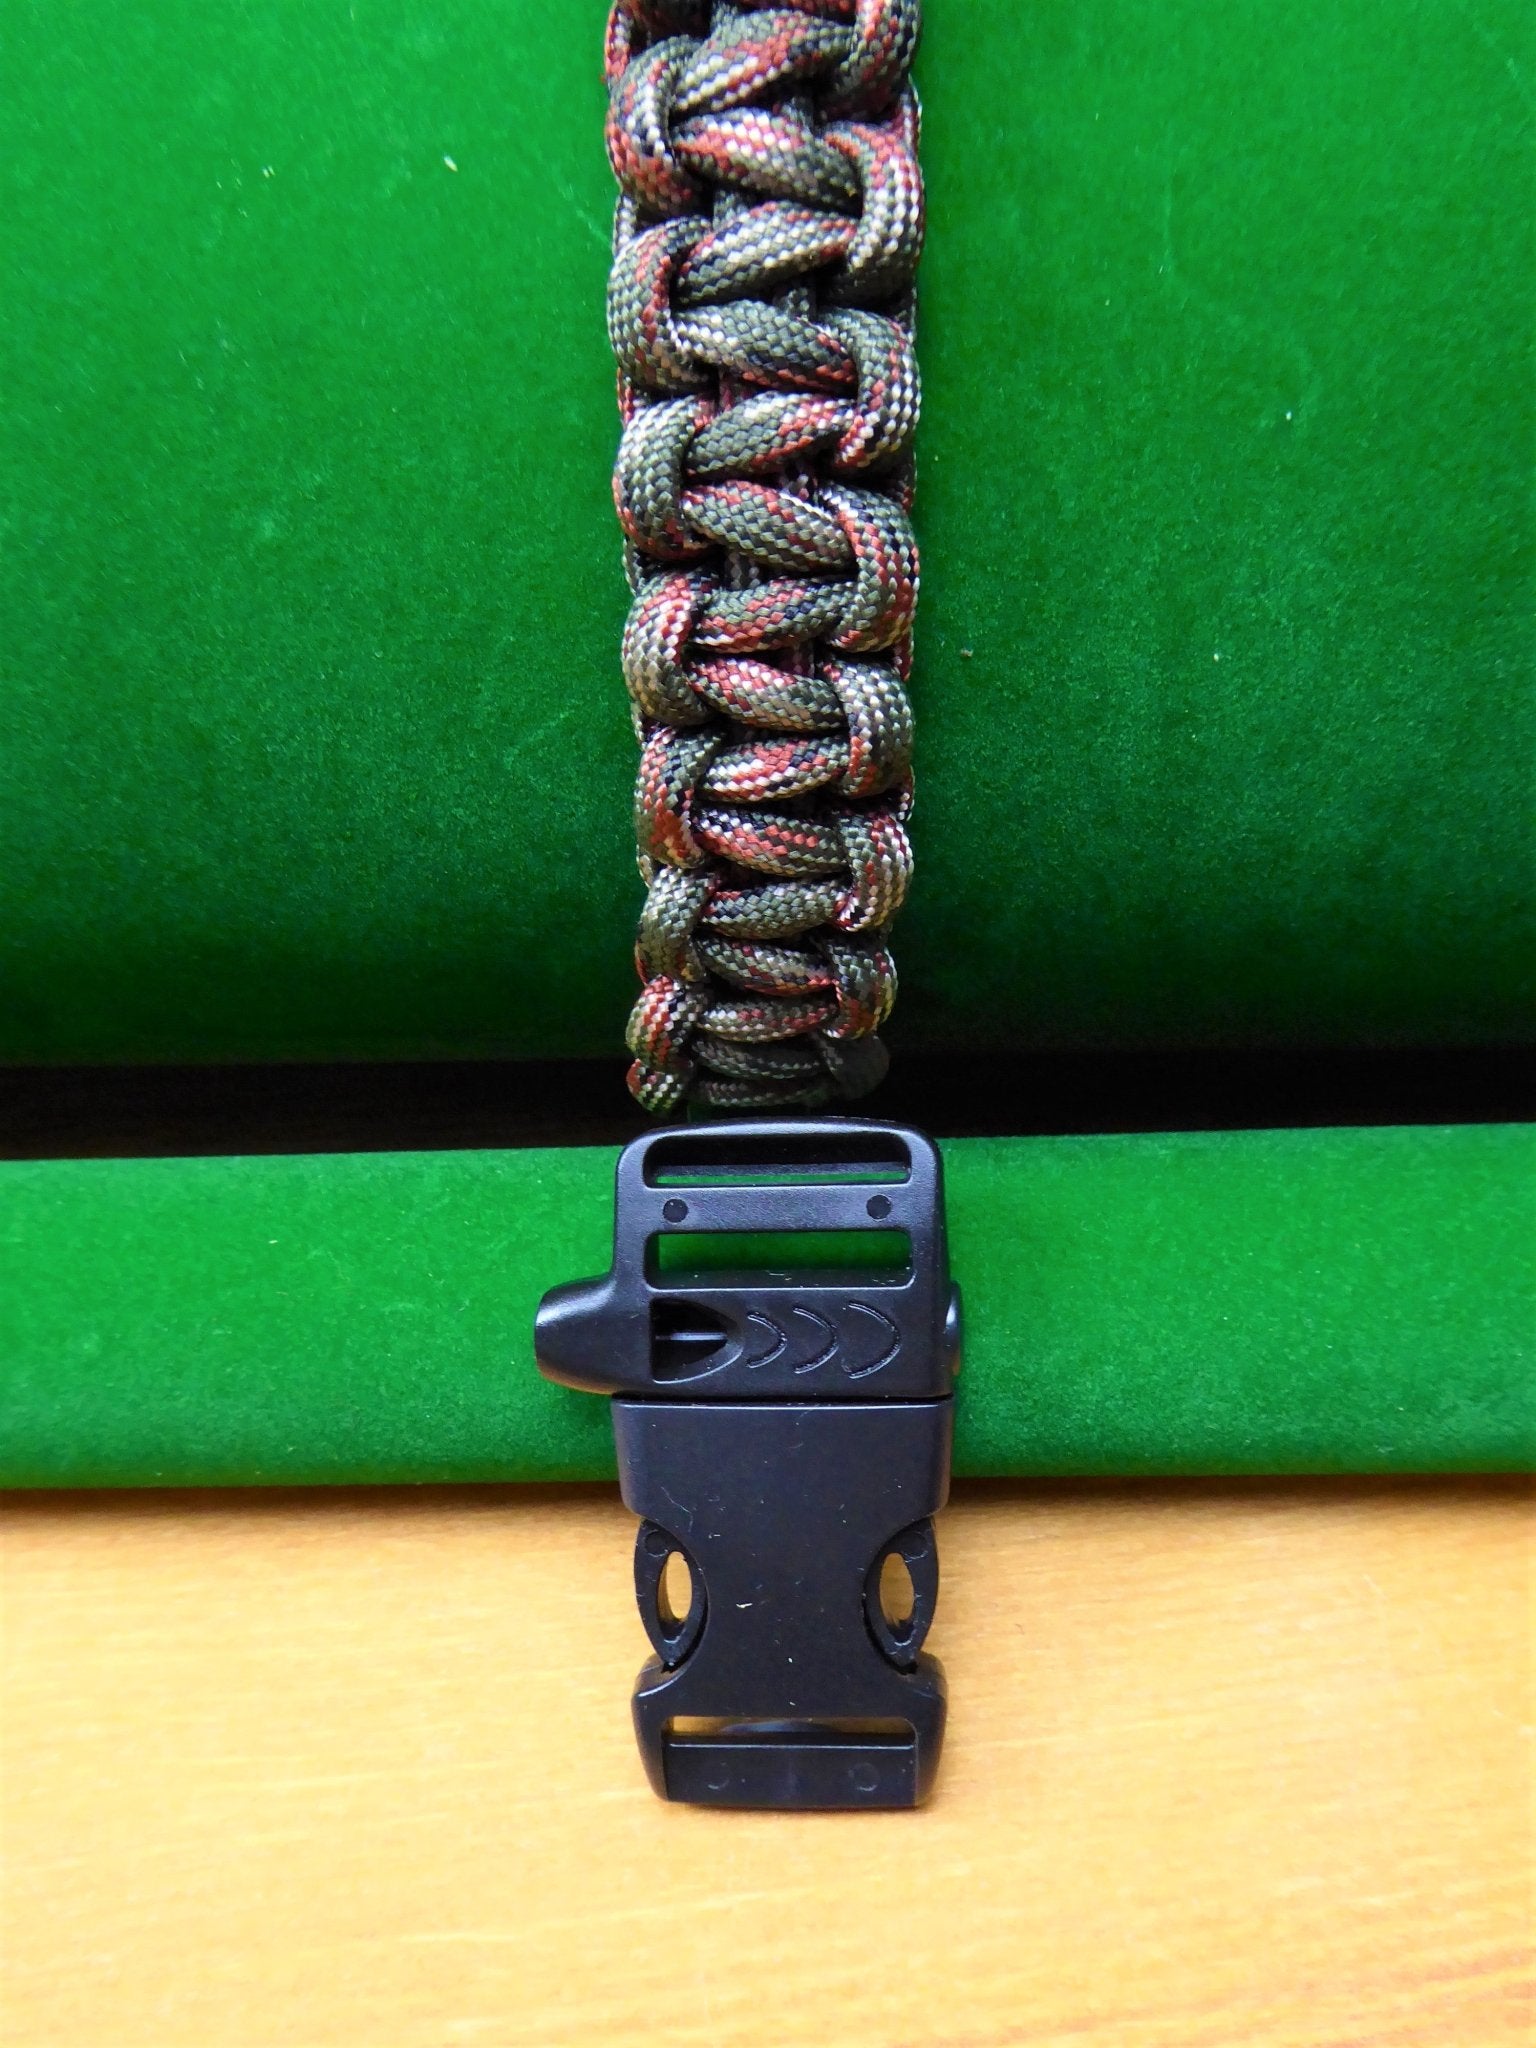 Paracord Buckle Bracelet kits with choice of colours Paracord Huggins Attic Army Camo Black Plastic whistle Buckle  [Huggins attic]